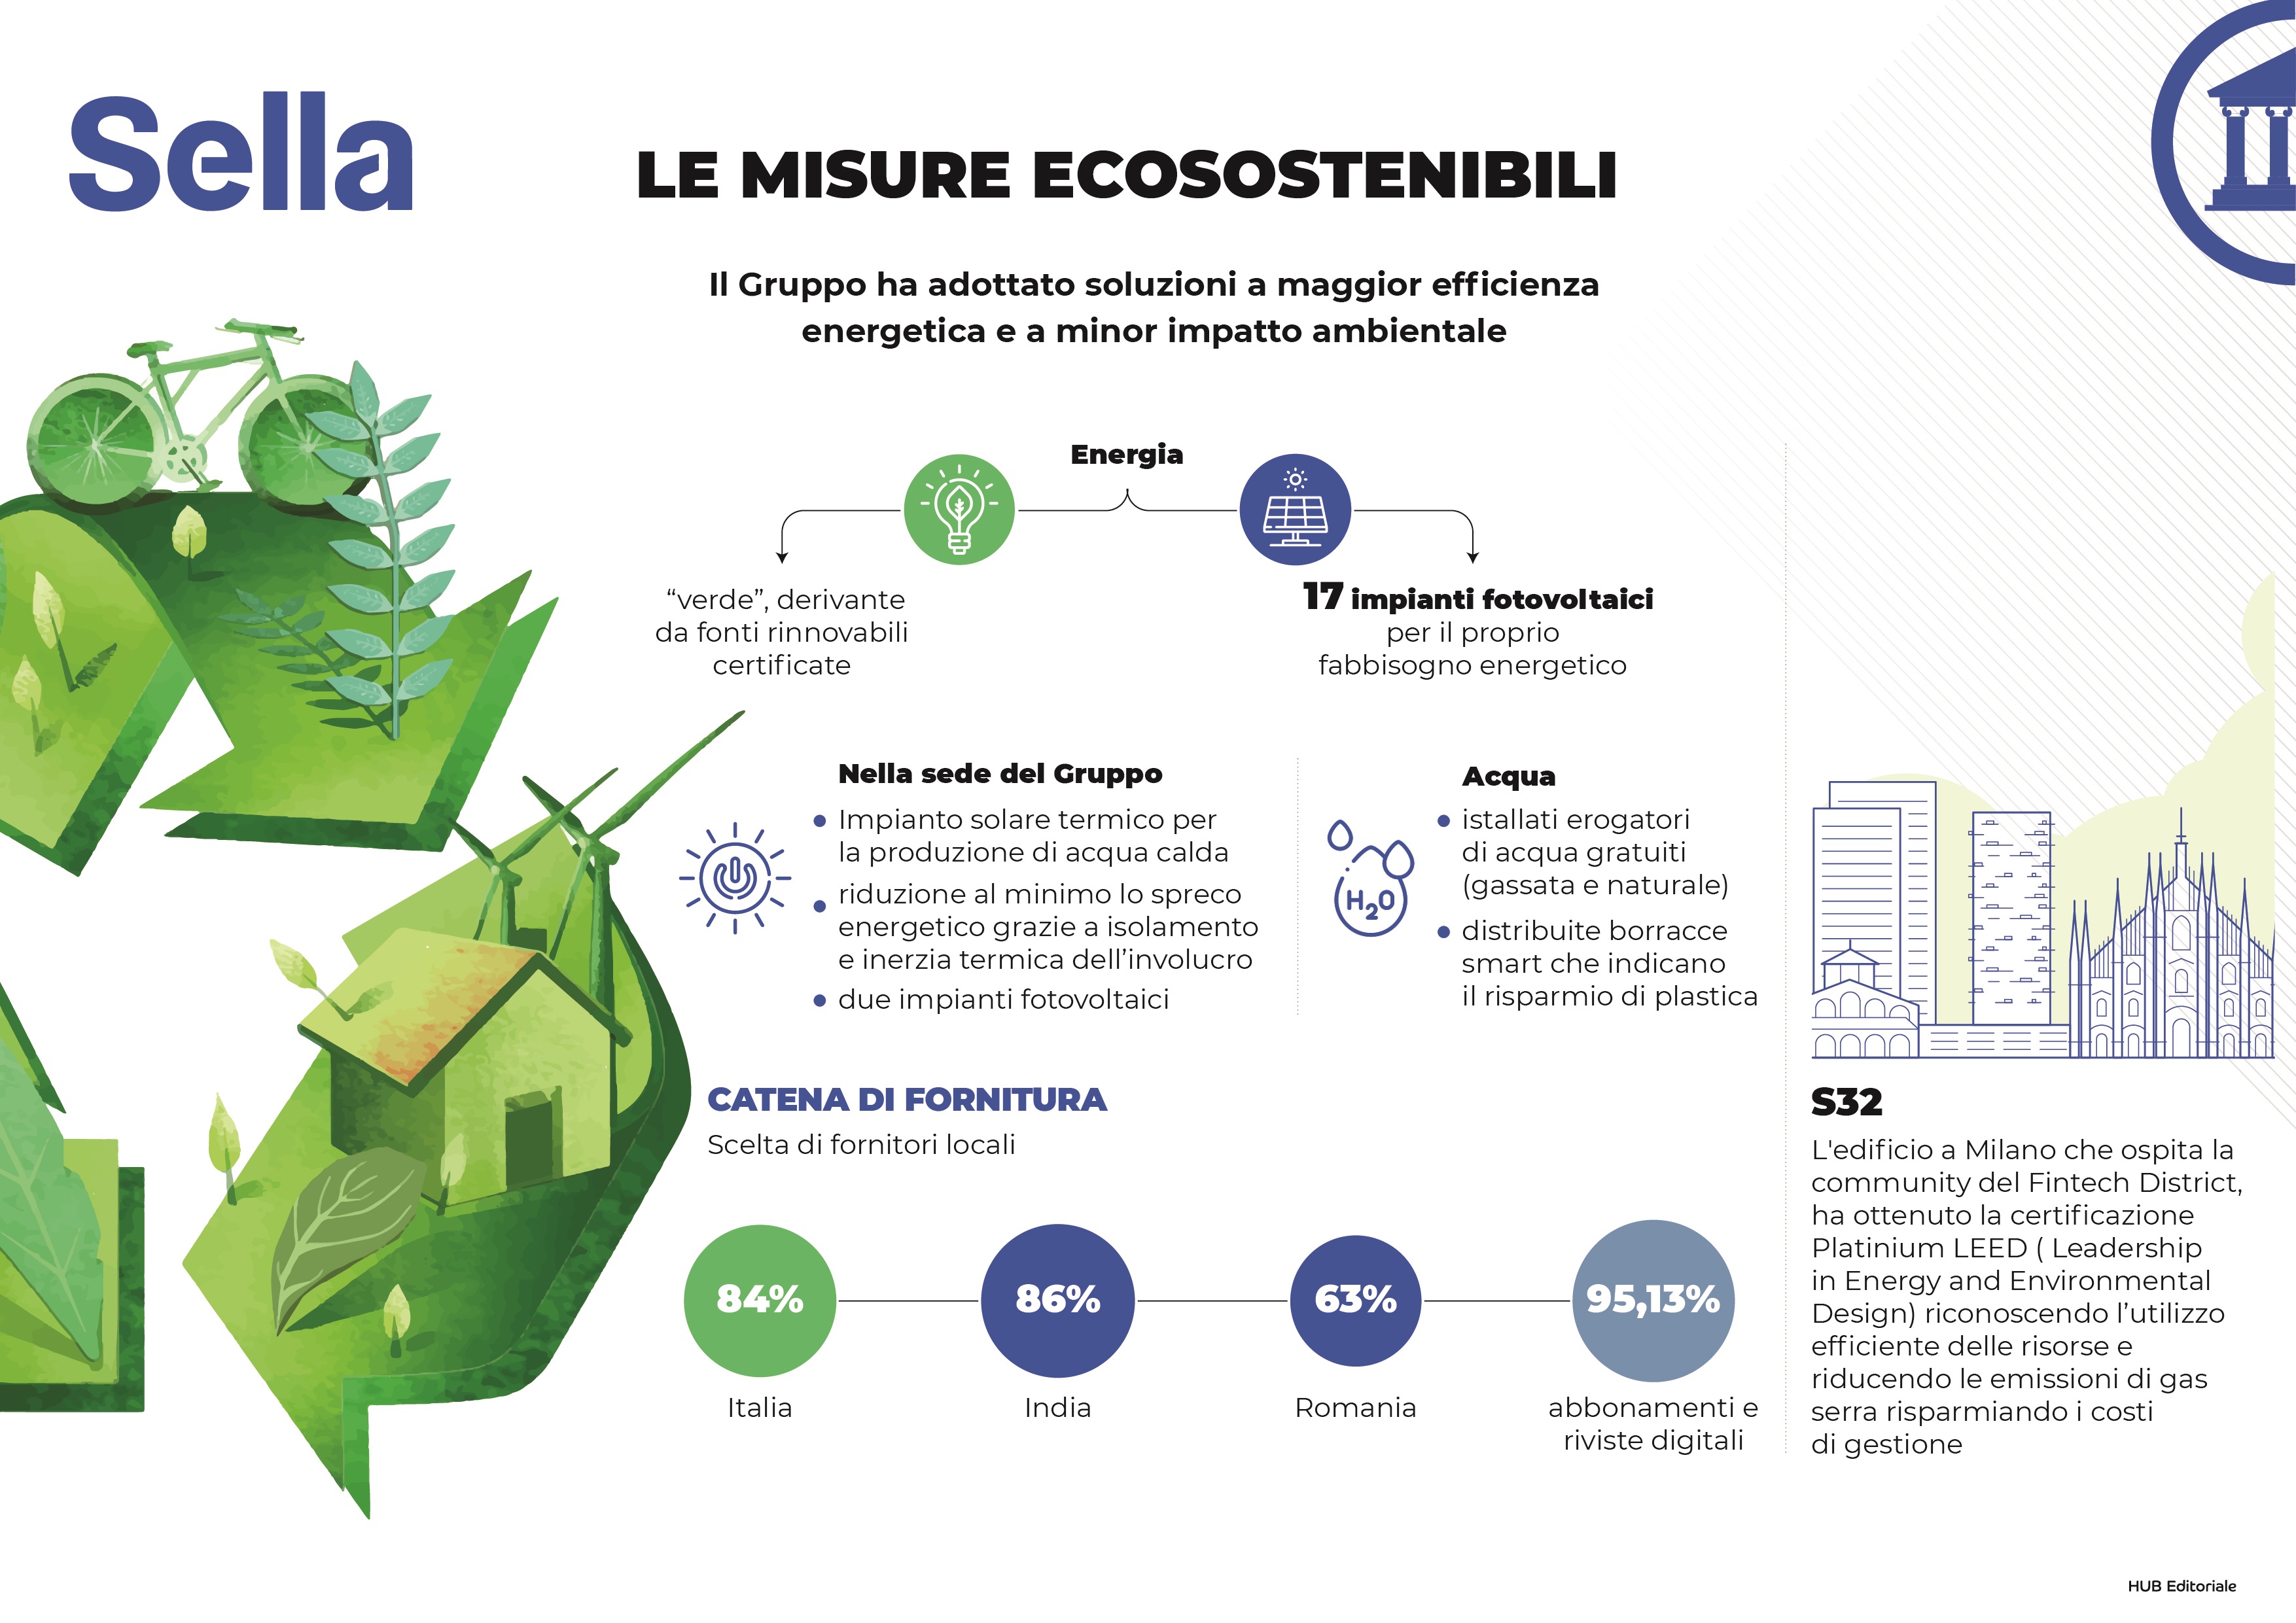 Energy efficiency, inclusion and 'green' investments in the Sella Sustainability Project